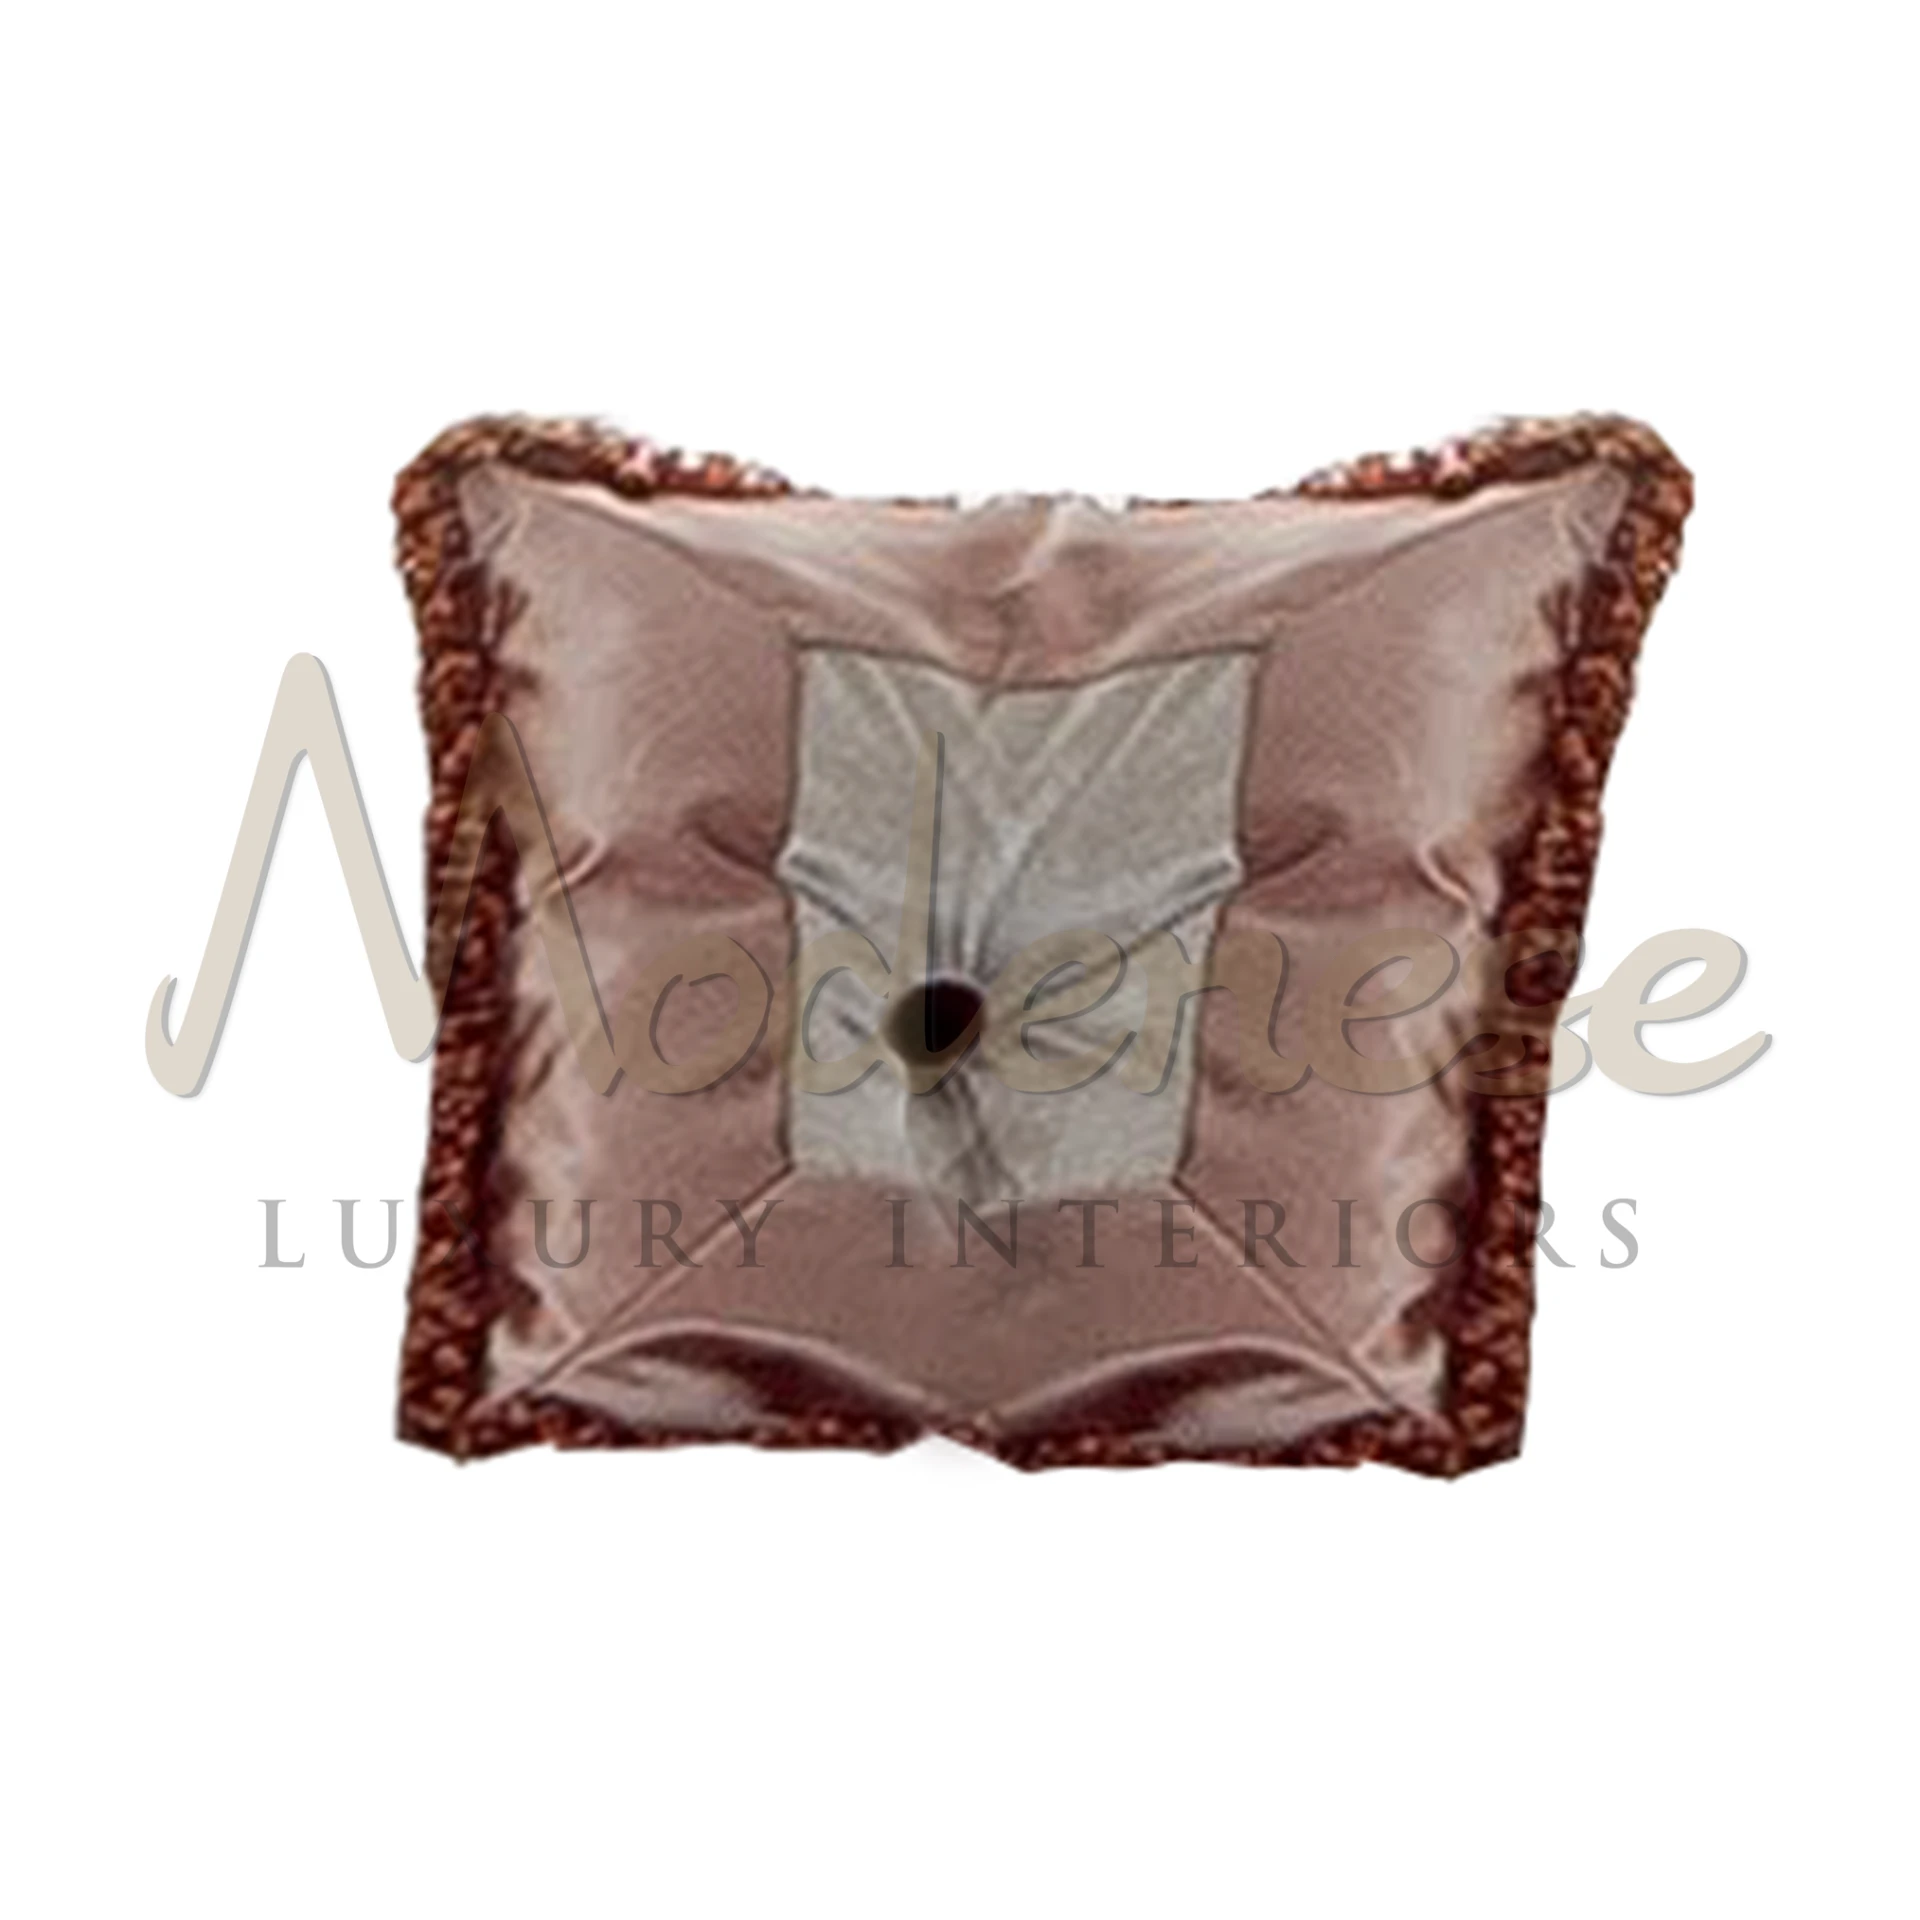 Classical Style Royal Pillow, showcasing exquisite craftsmanship with luxury textiles and ornate embellishments.